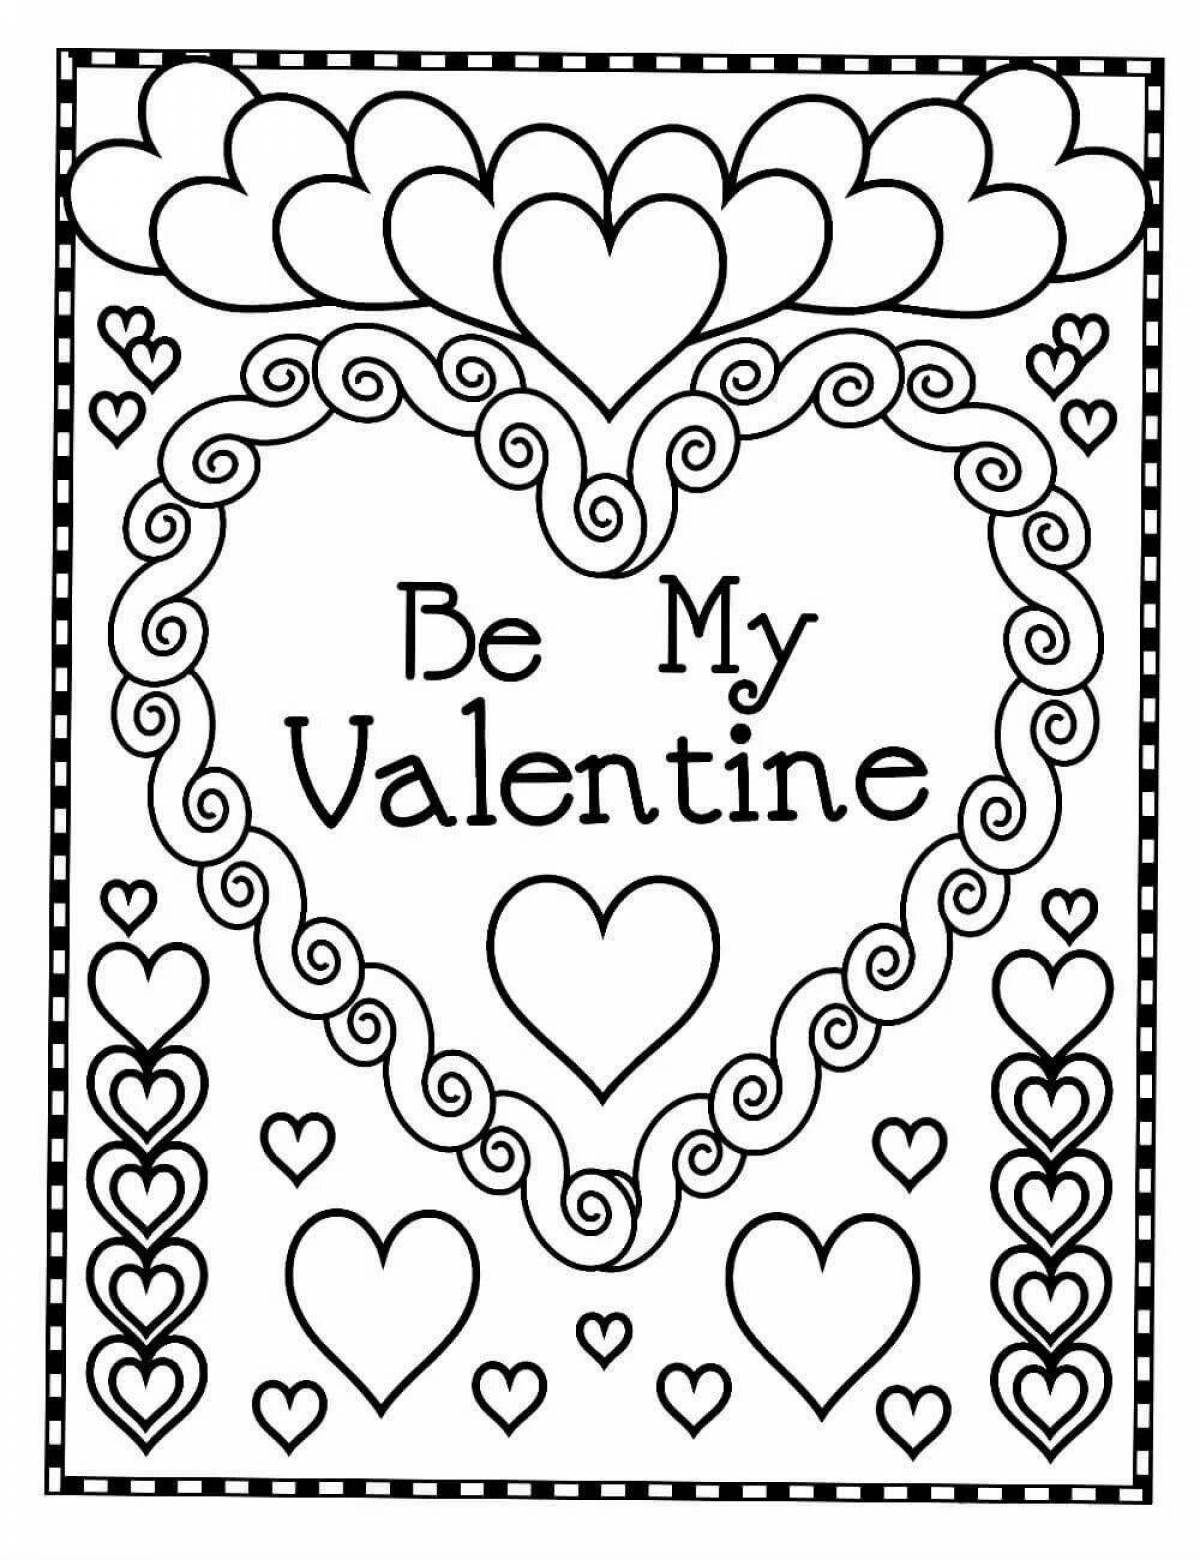 Bright coloring valentines for February 14th